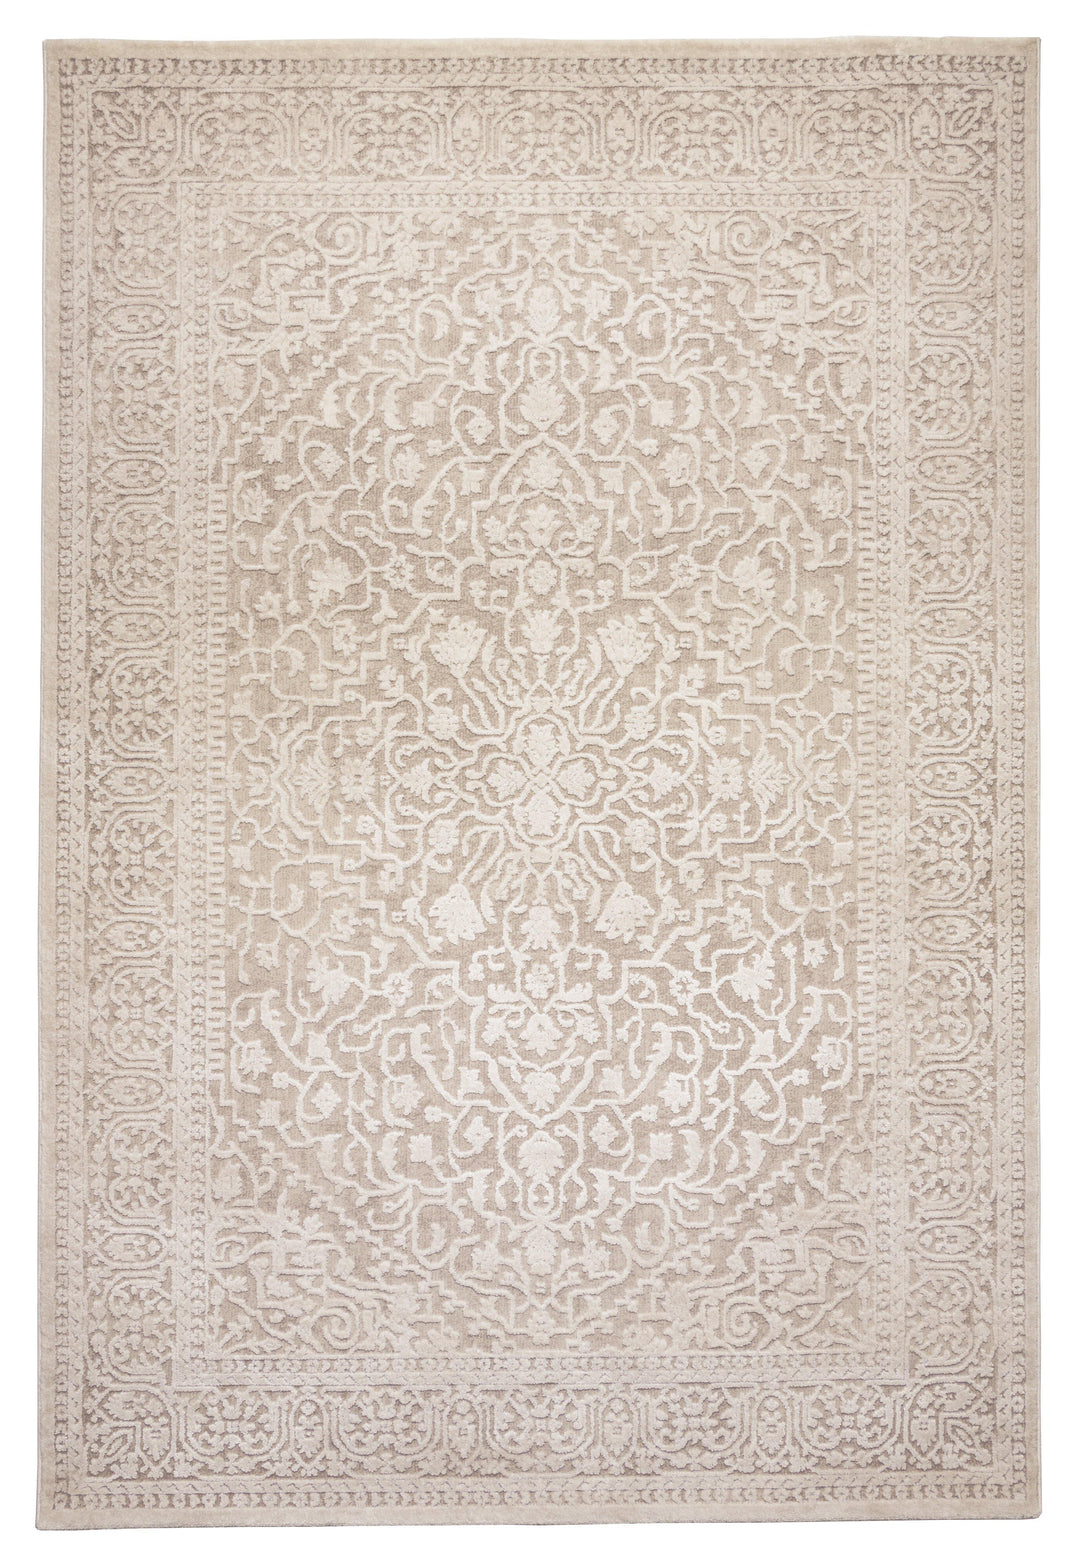 Carpets and Rugs: Buy Rugs Online at Best Prices Starting from Rs 338